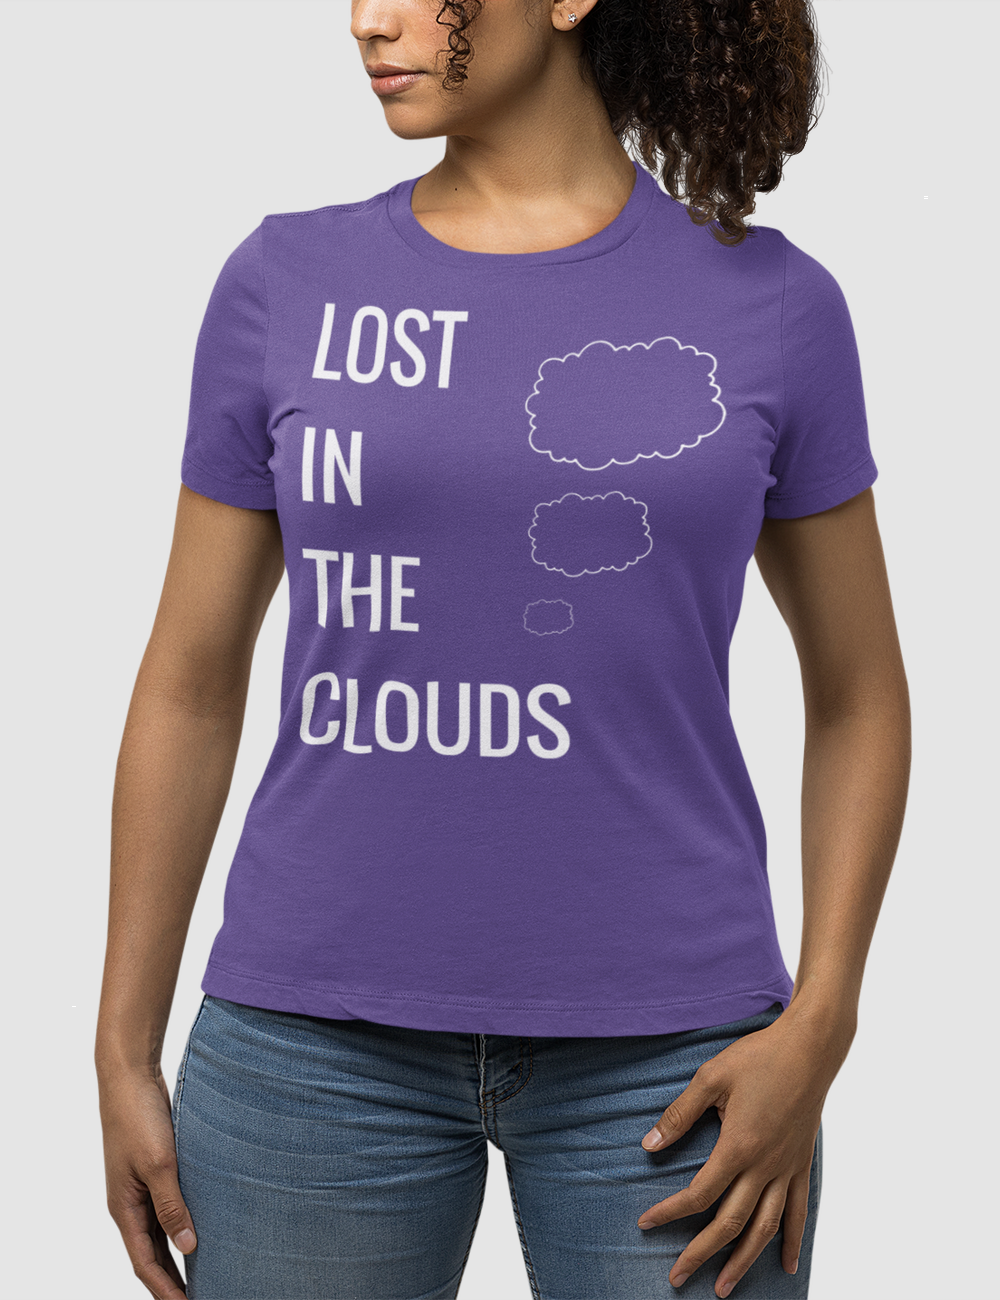 Lost In The Clouds | Women's Fitted T-Shirt OniTakai